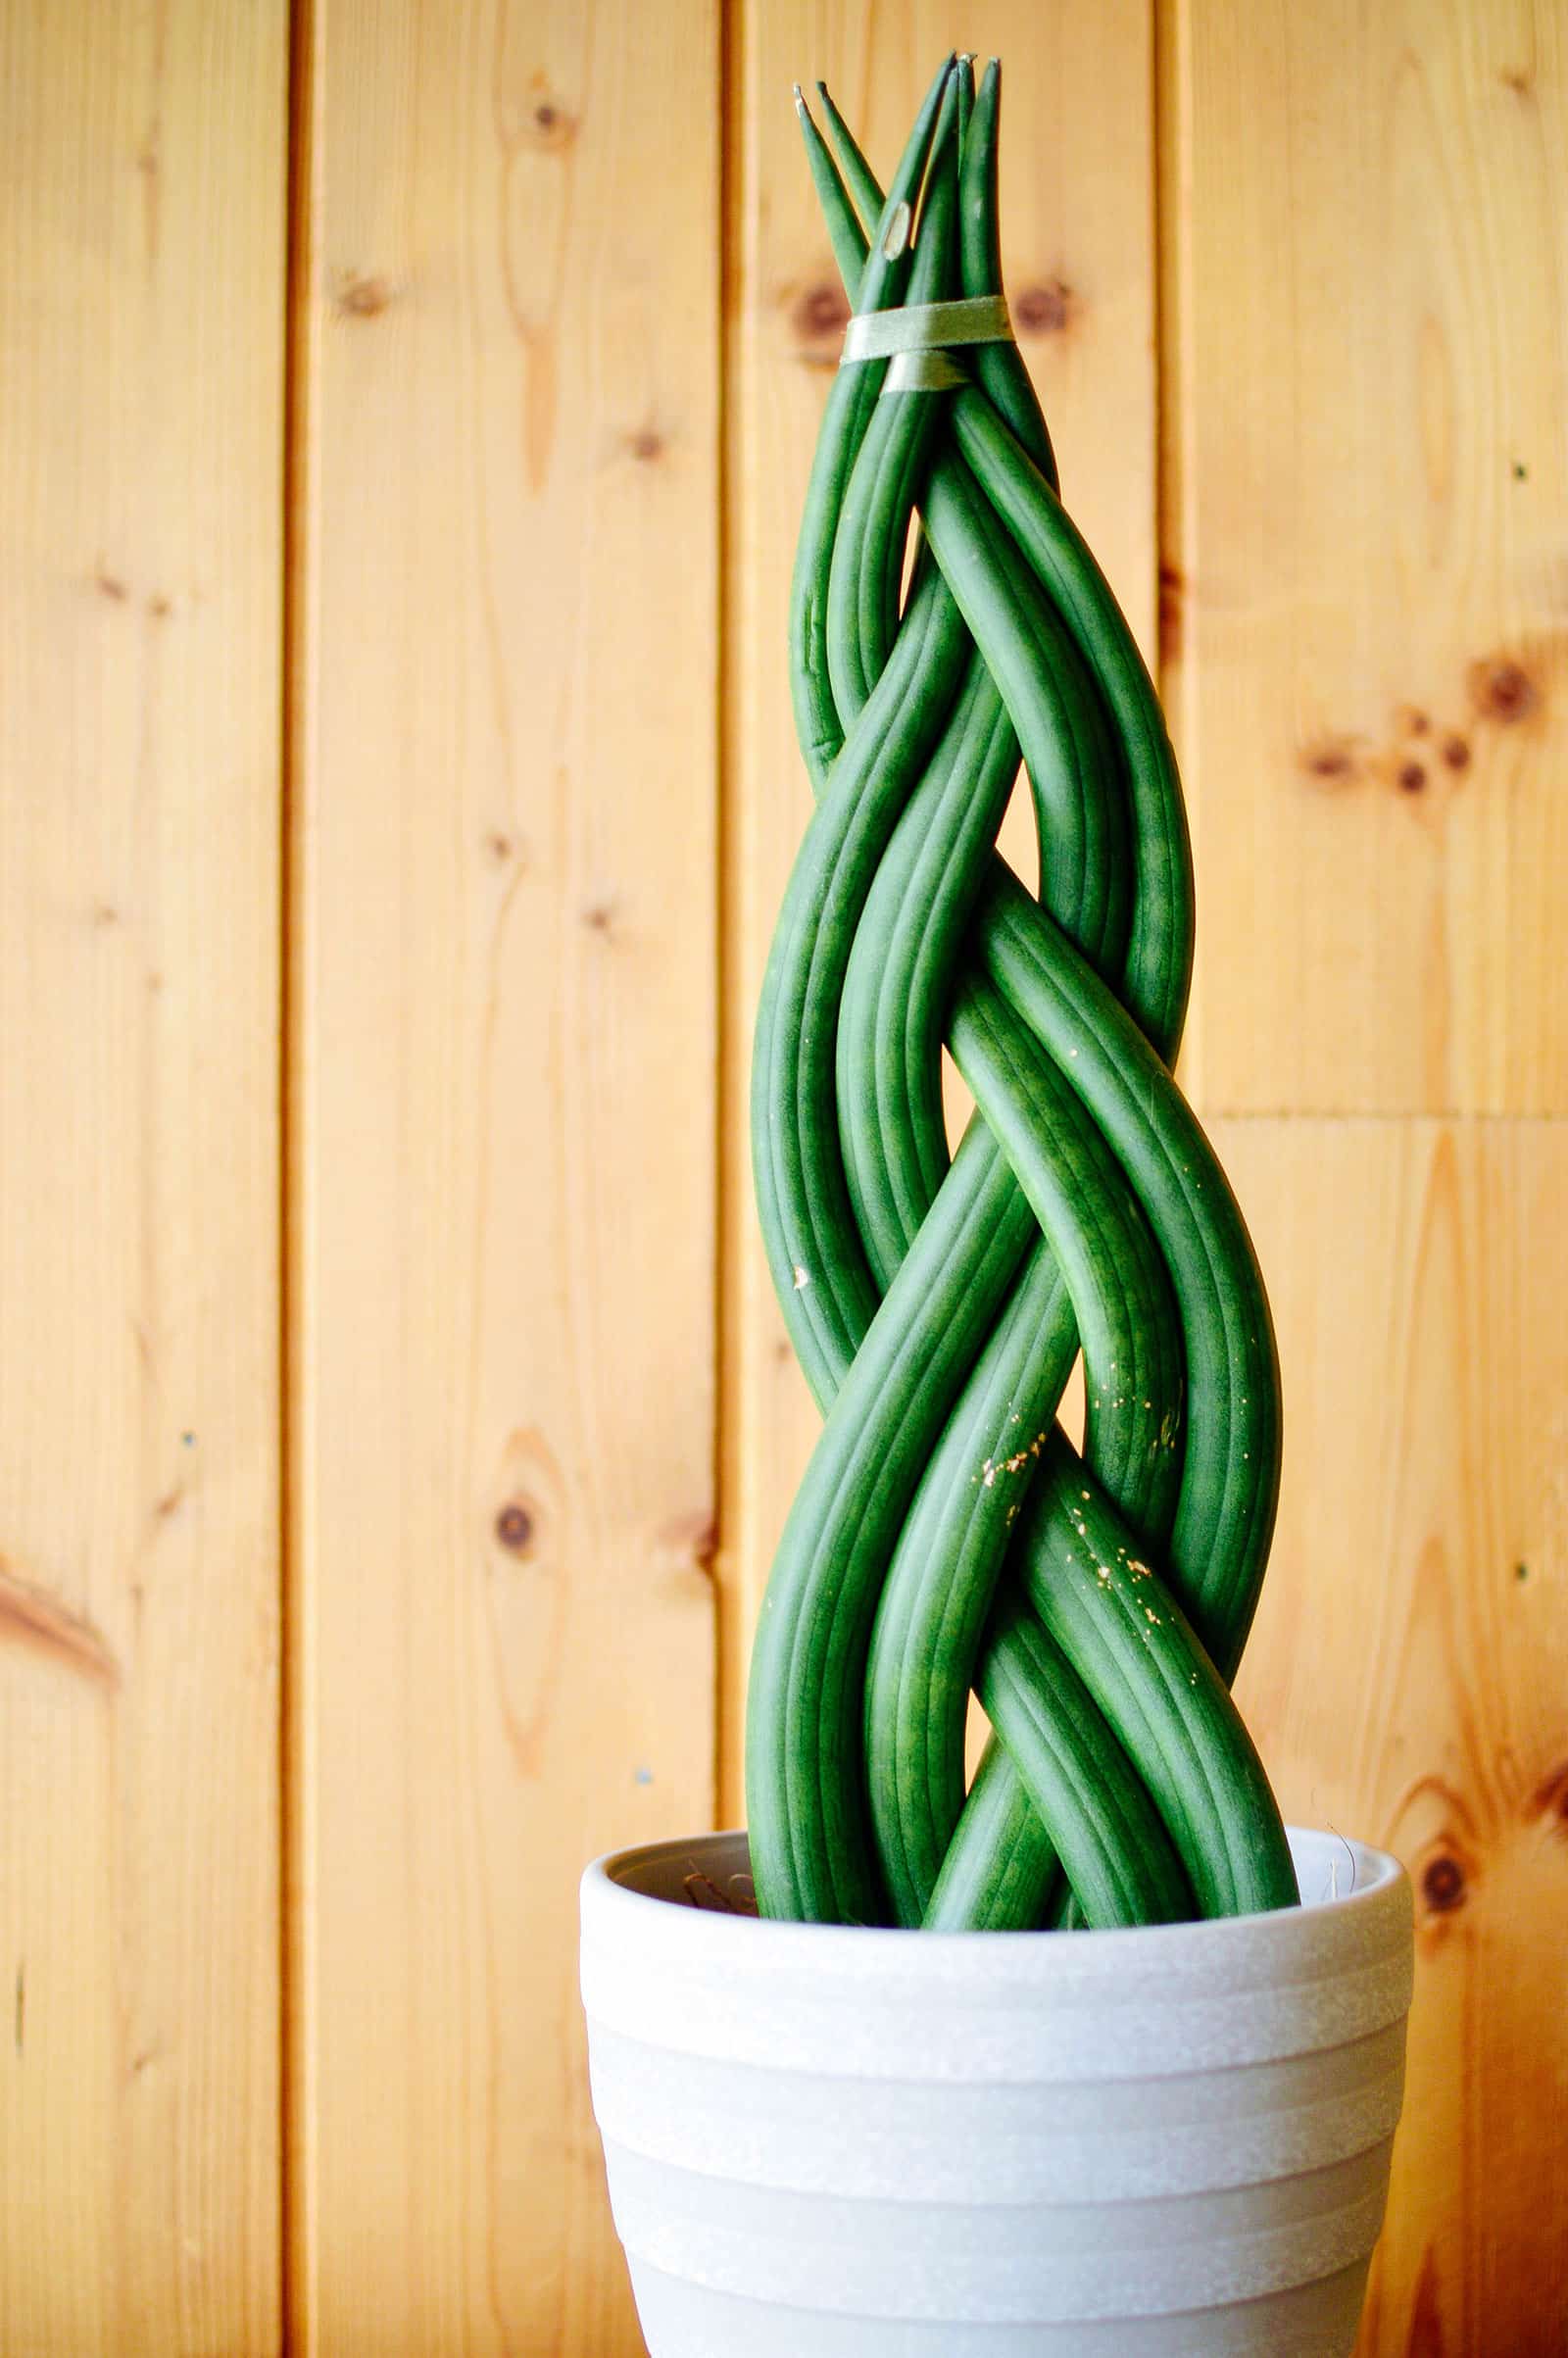 A braided Sansevieria cylindrica snake plant in a white pot, shot against a rustic wood planked wall